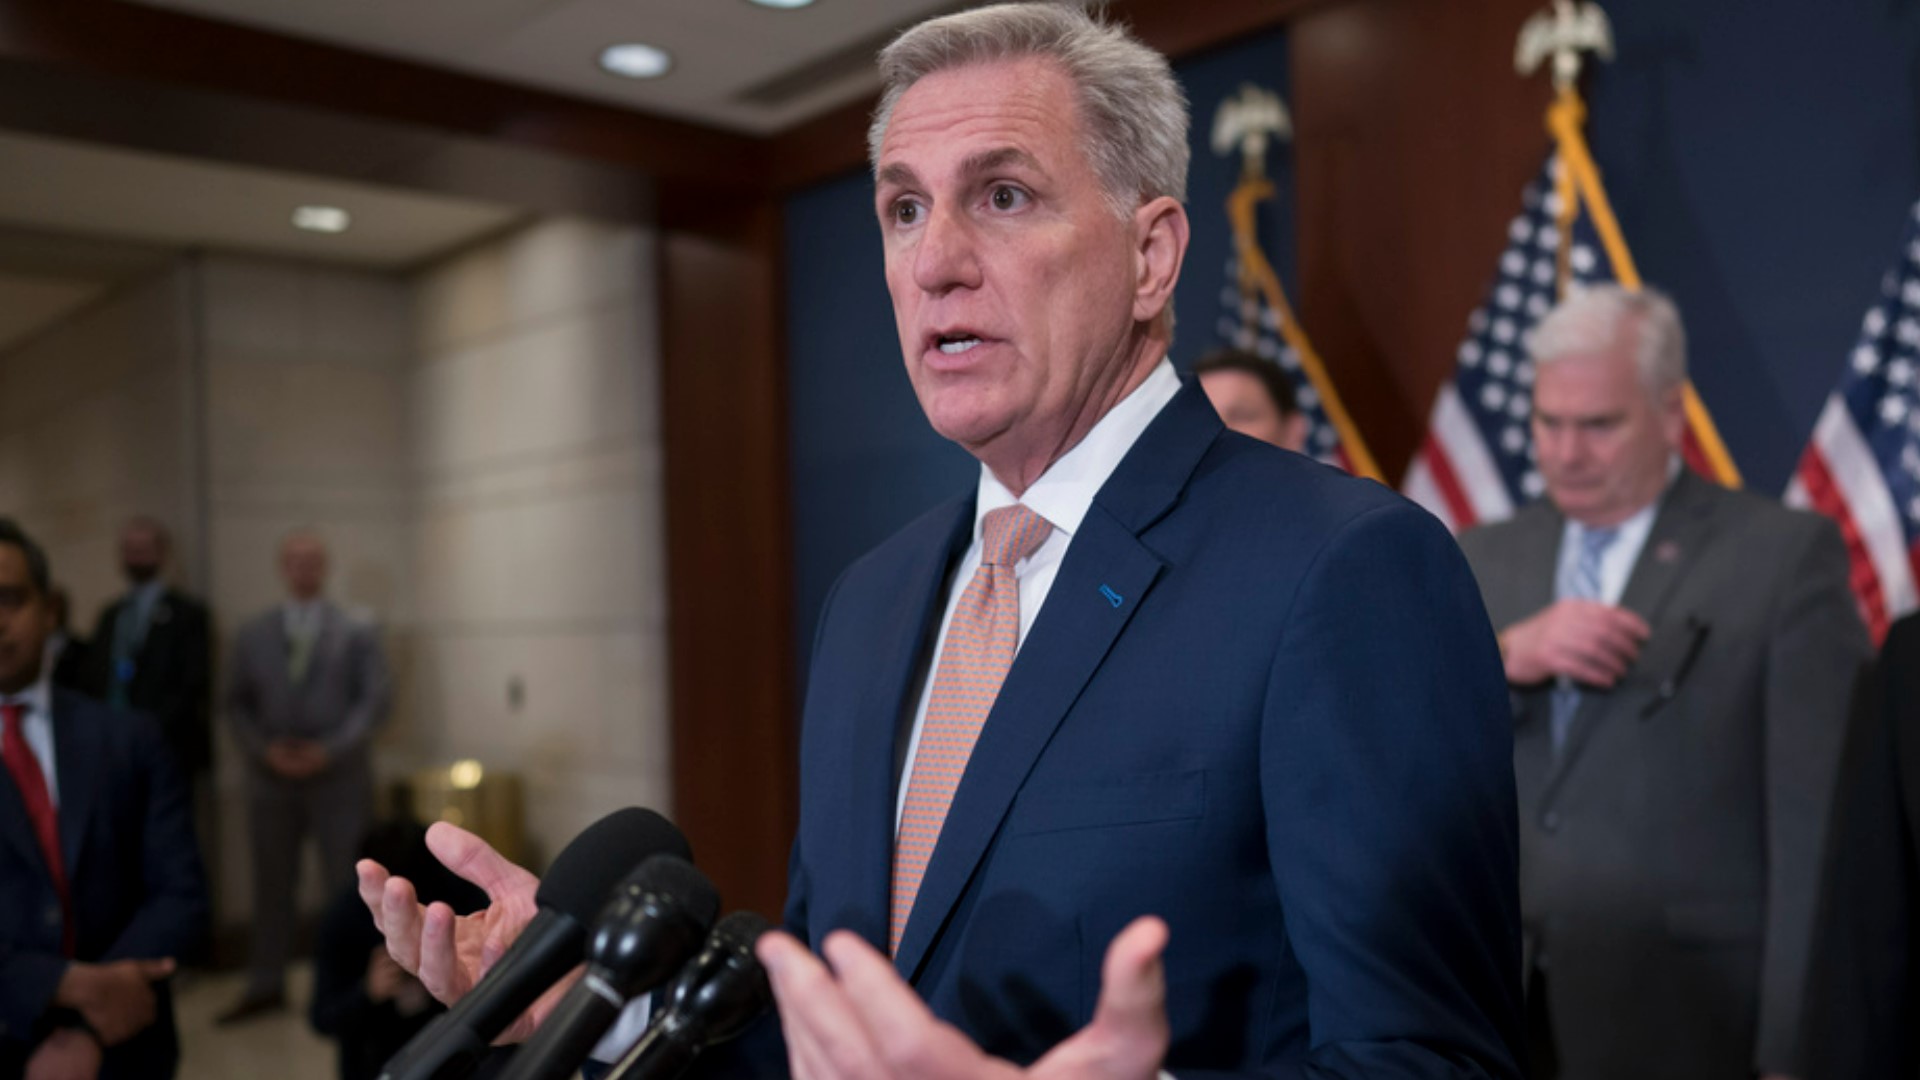 House Speaker Kevin McCarthy vowed to vote on a bill to raise the debt limit while lowering future federal spending.